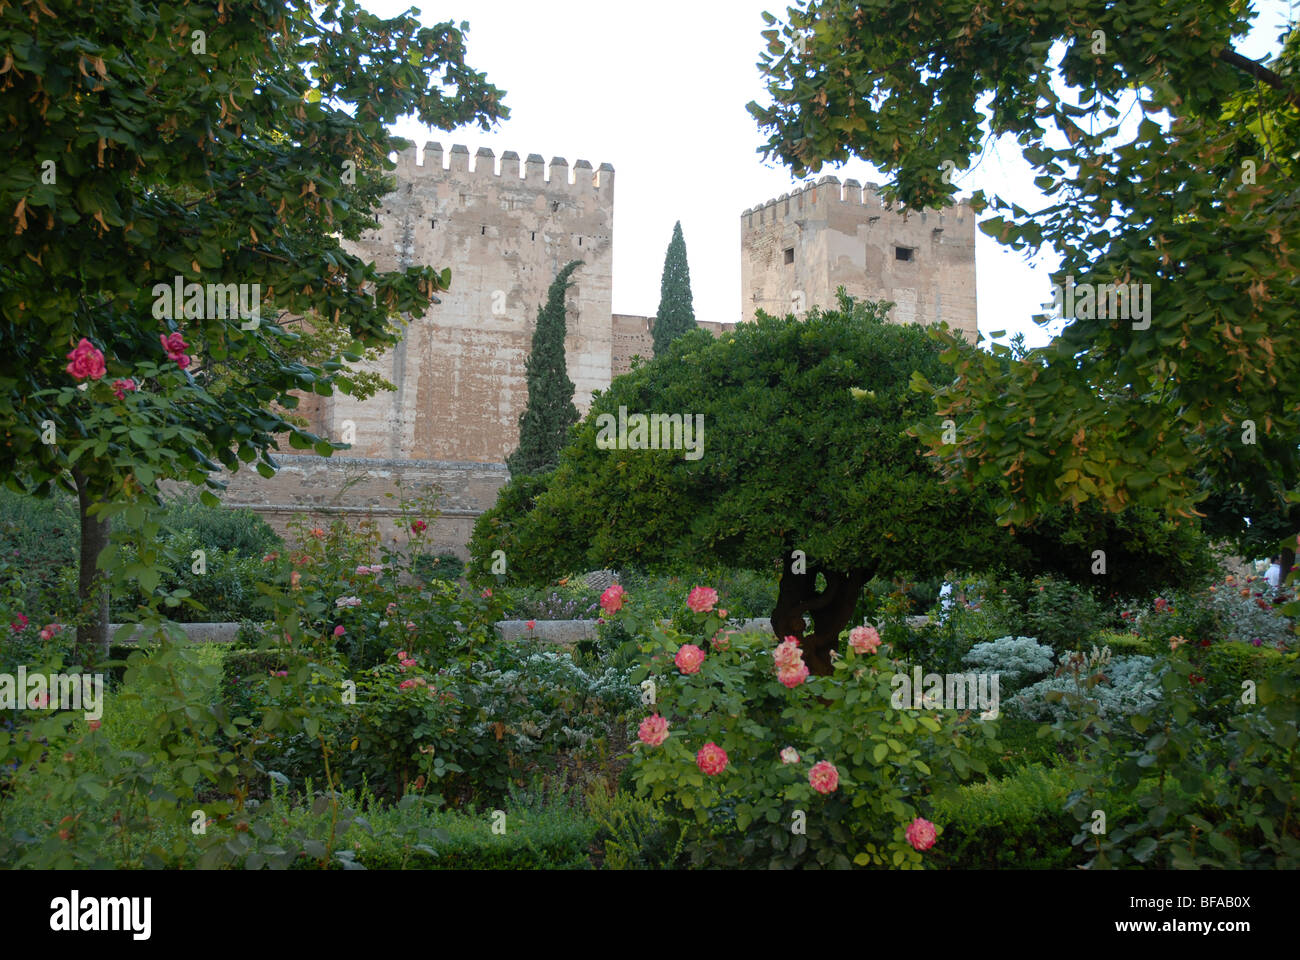 The Alcazaba from the gardens in front of Palacio Carlos V, The Alhambra, Granada, Andalusia, Spain Stock Photo